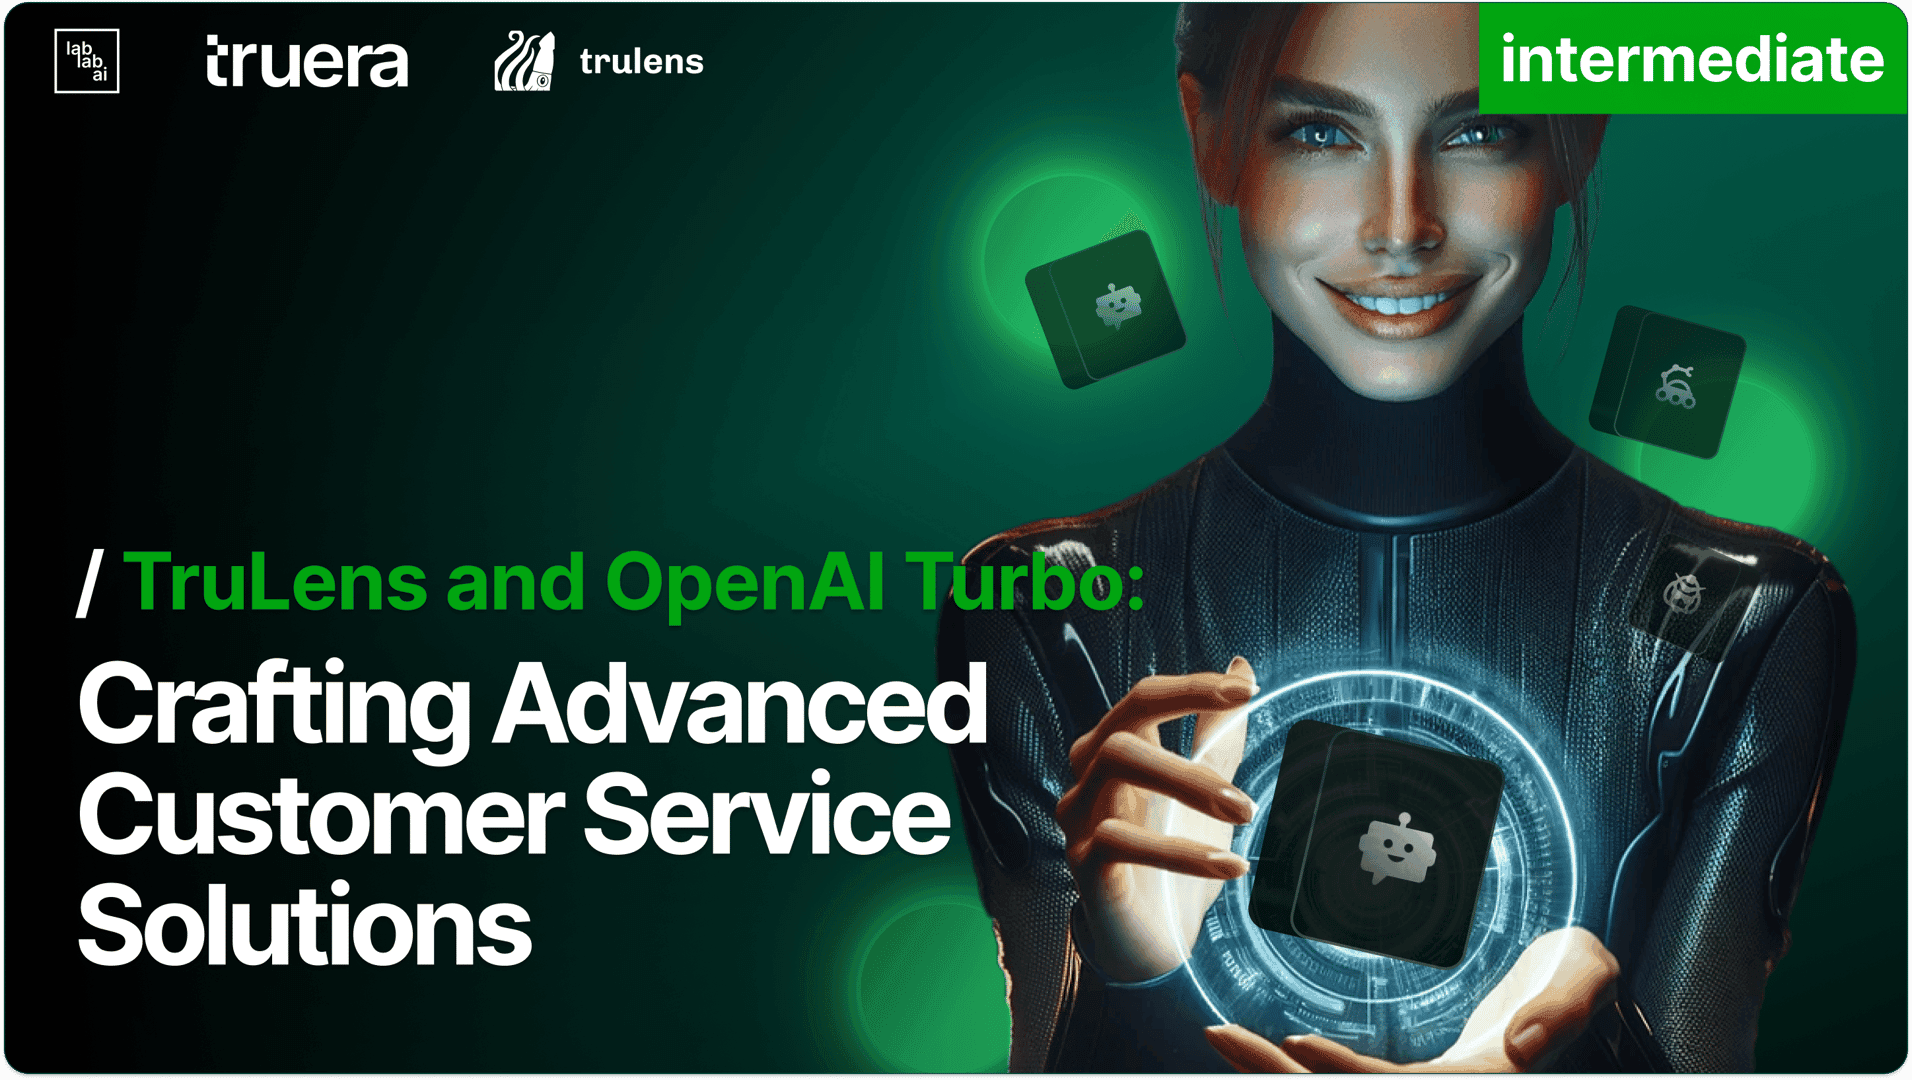 TruLens and OpenAI Turbo: Crafting Advanced Customer Service Solutions